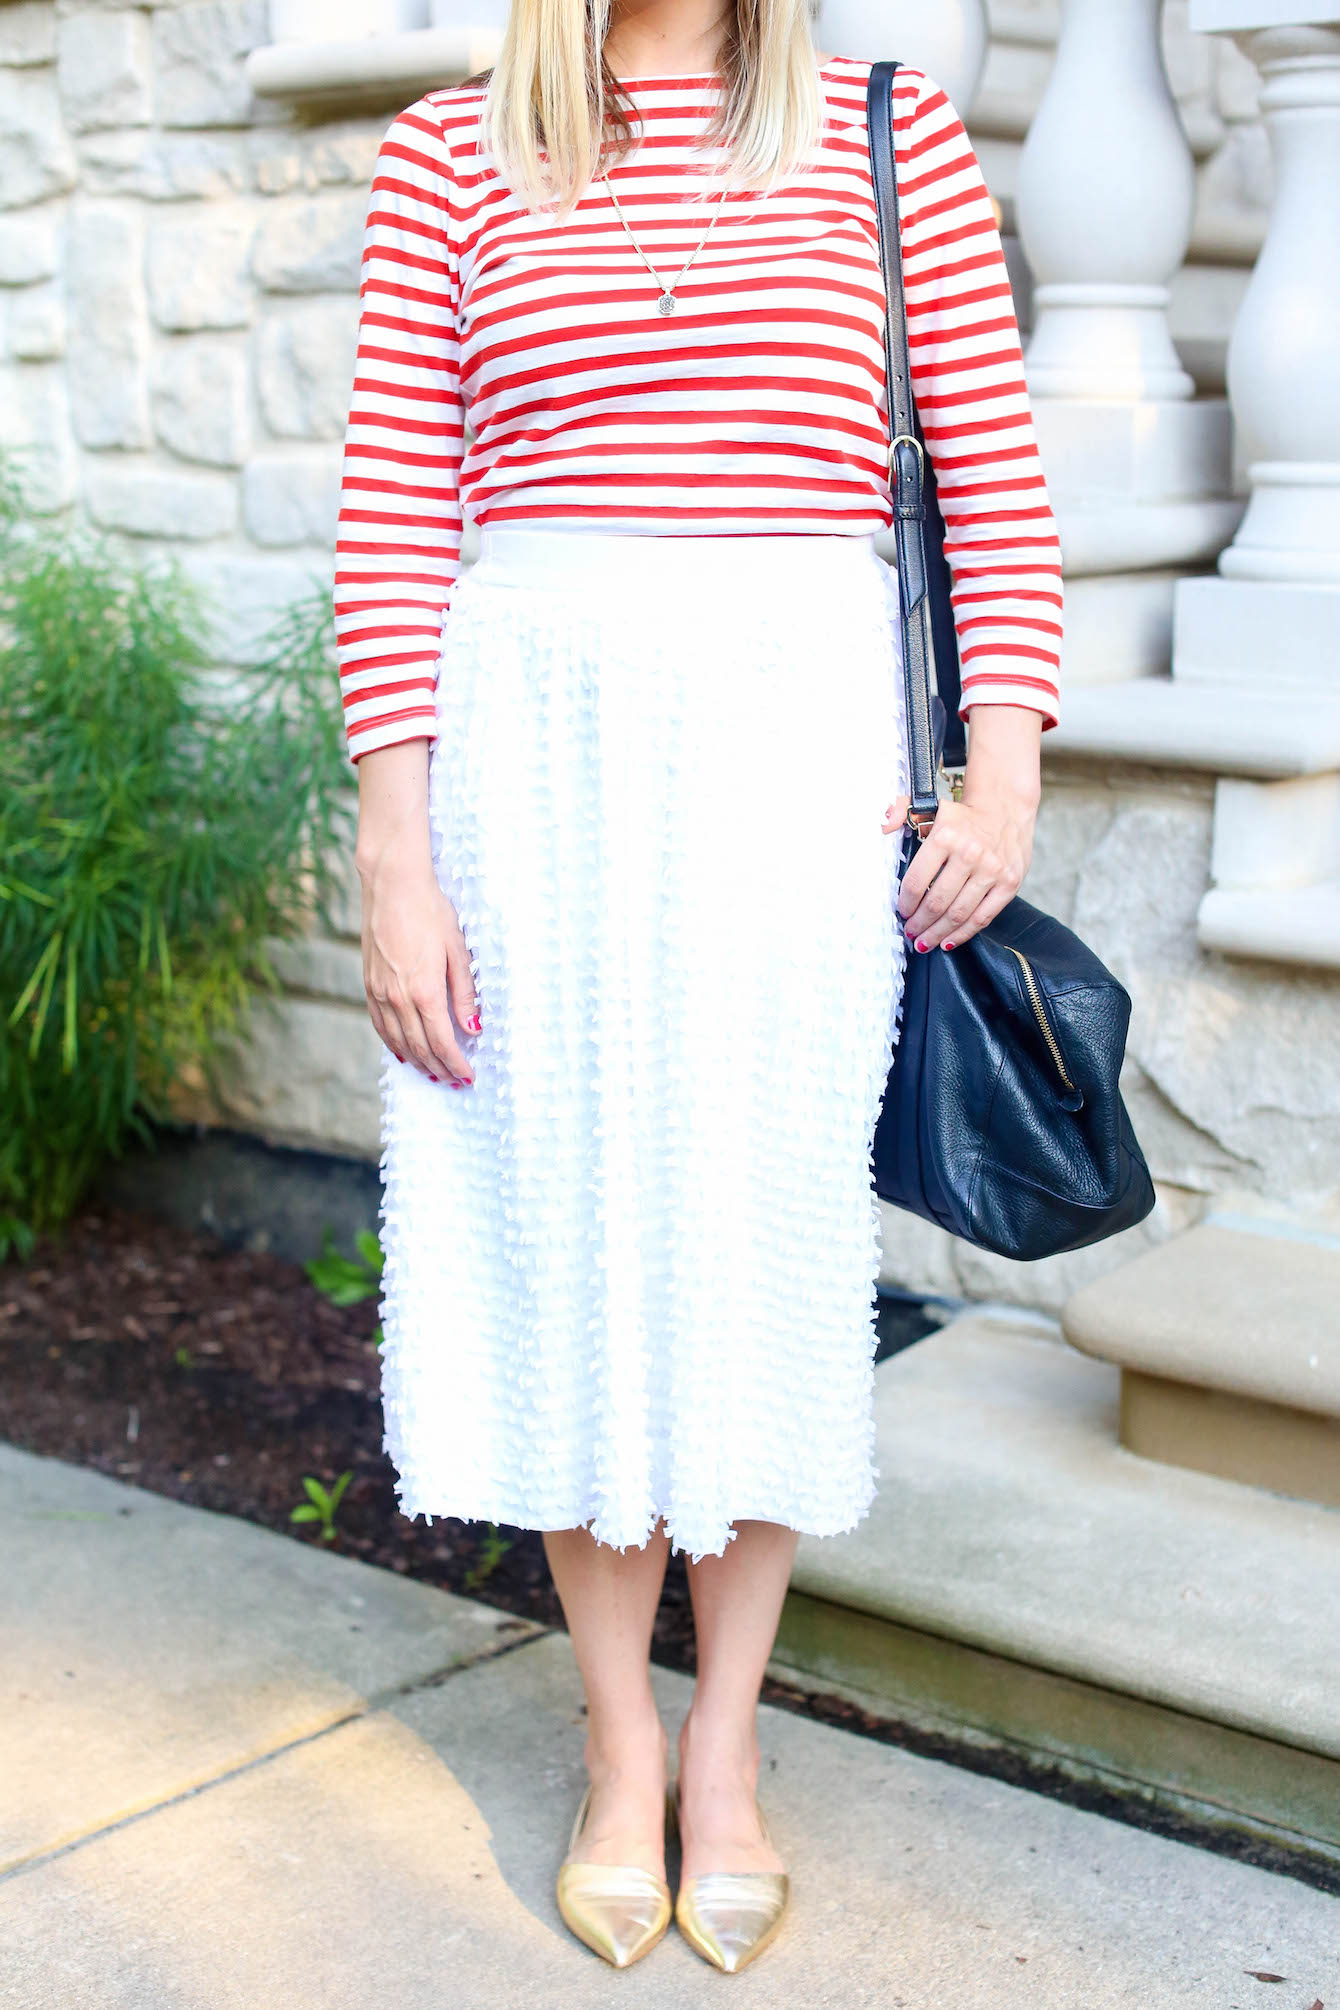 Charmingly-Styled-Stripes (16 of 16)